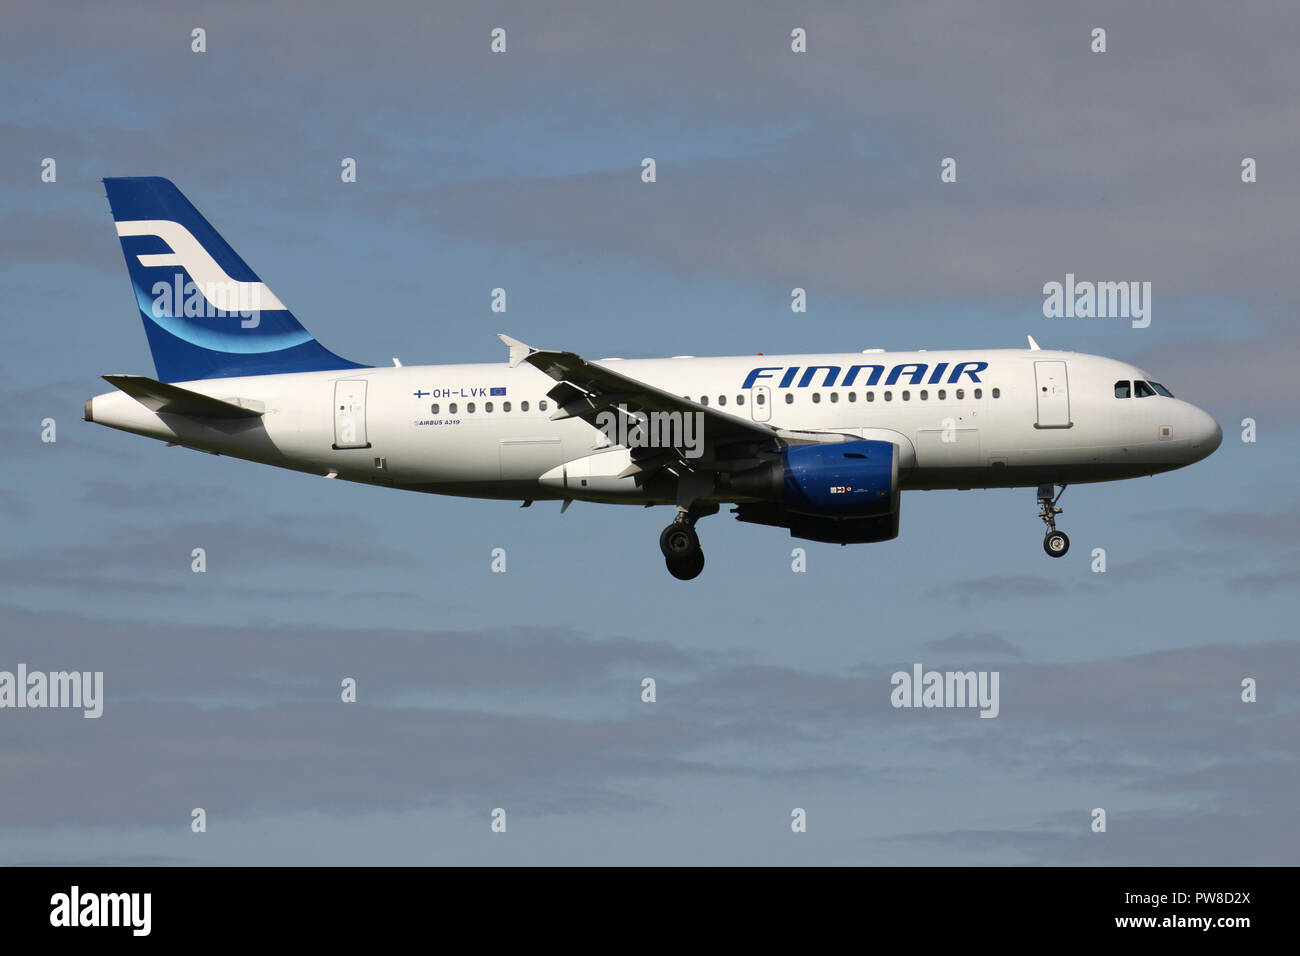 Finnair Airbus A319-100 (old livery) with registration OH-LVK on short  final for runway 14 of Zurich Airport Stock Photo - Alamy